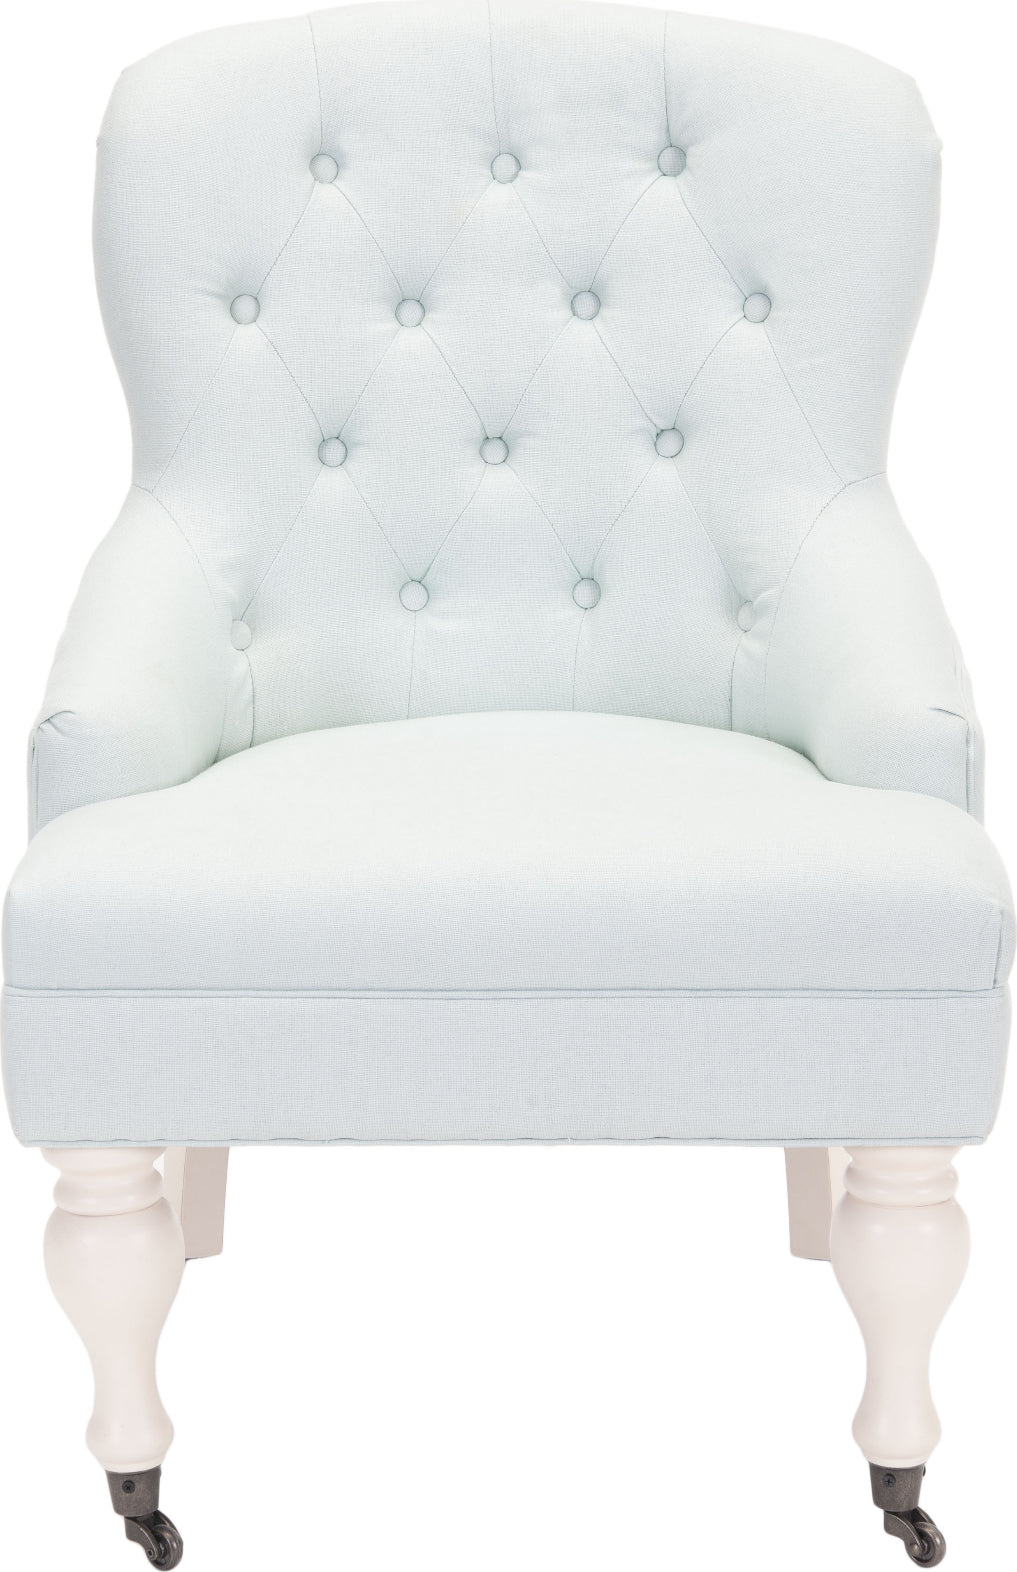 Safavieh Falcon Tufted Arm Chair Robins Egg Blue and Ivory Furniture main image